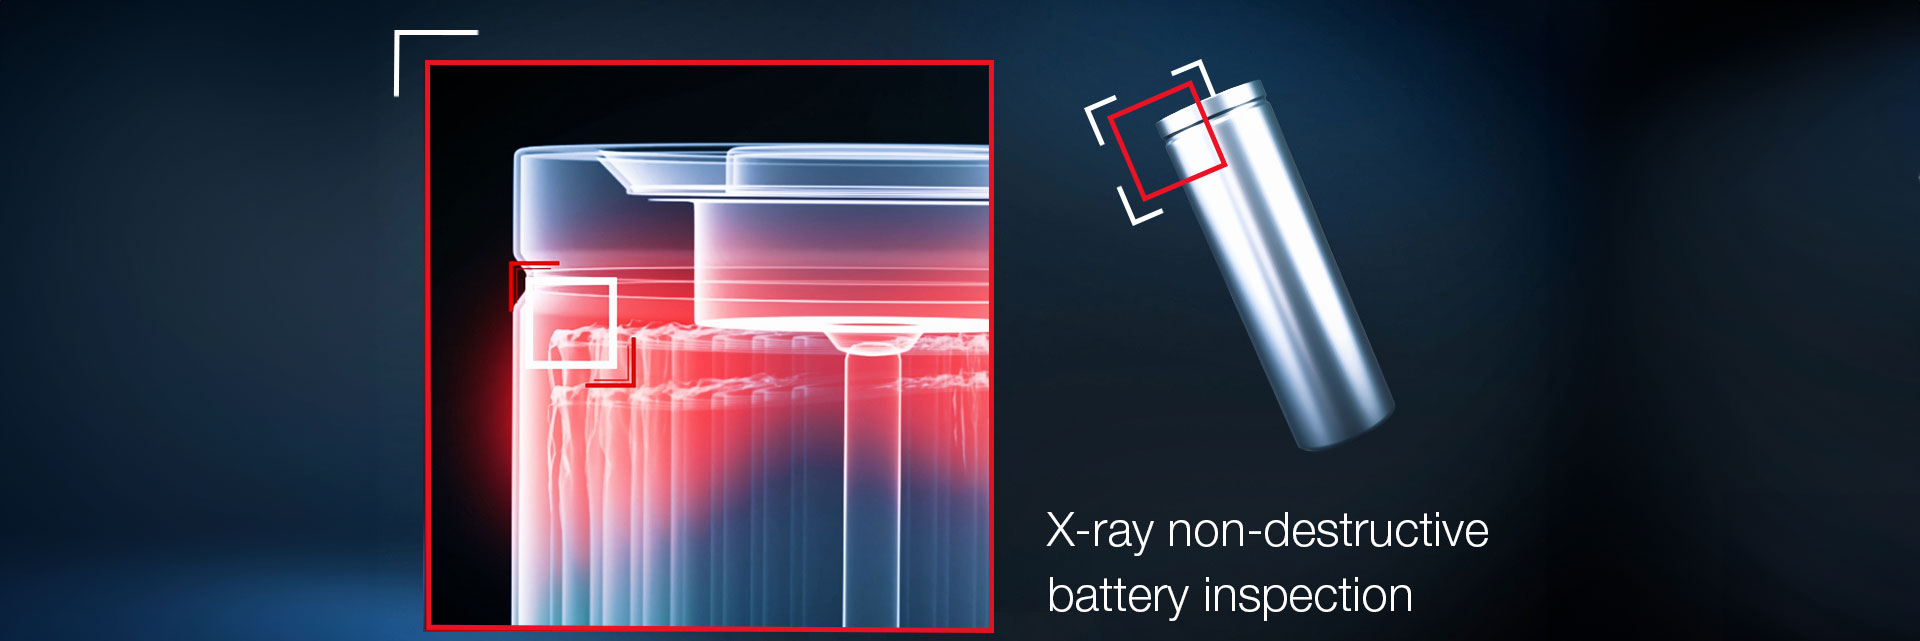 Webinar: High-Resolution In-line X-ray Imaging for Lithium-Ion Battery Inspection